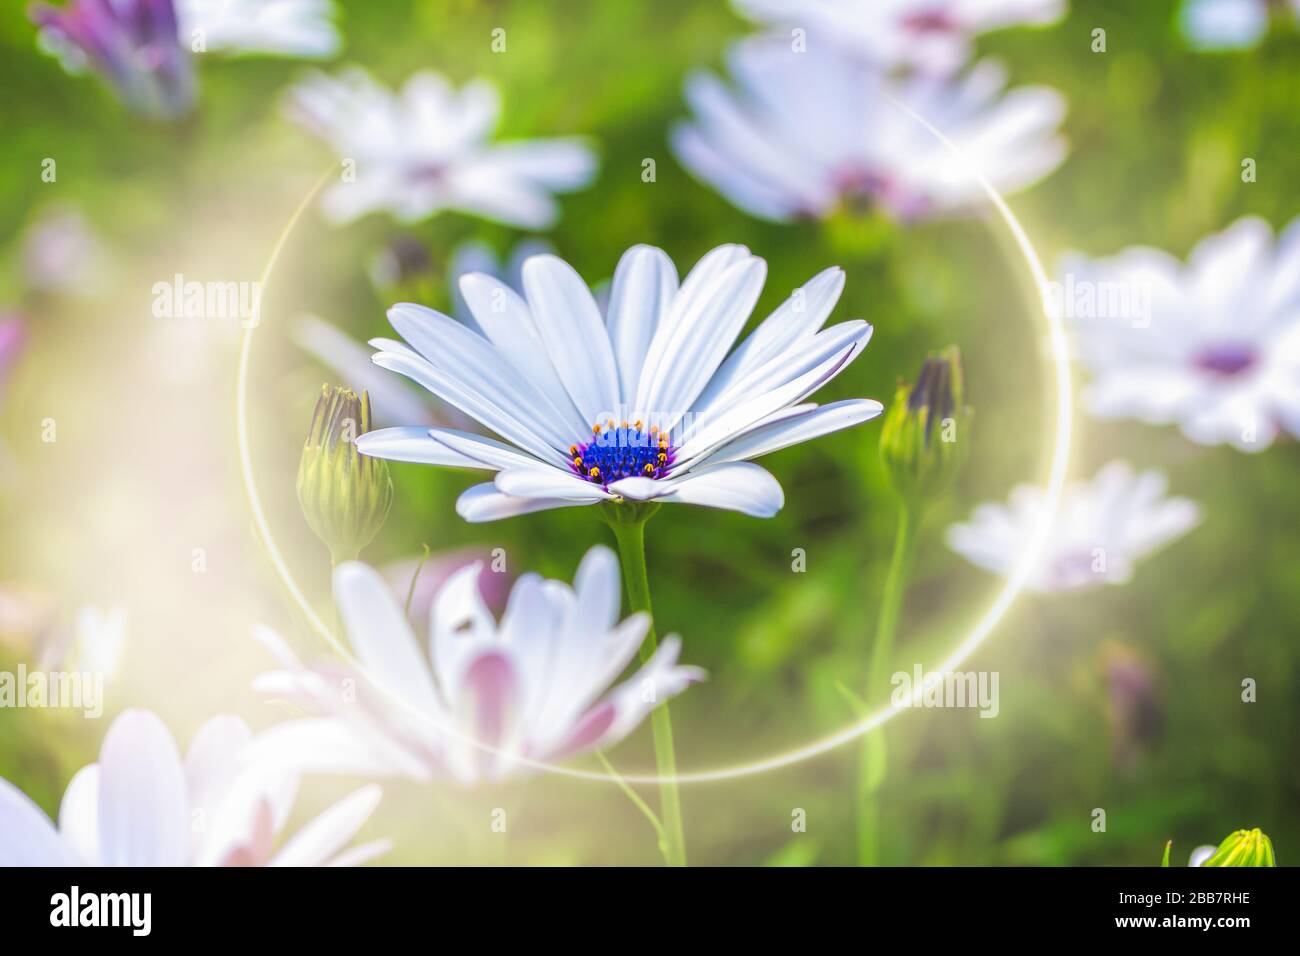 Arctotis white flower blooming Close-up on a bright sunny day. Summer warmth and joy concept Stock Photo